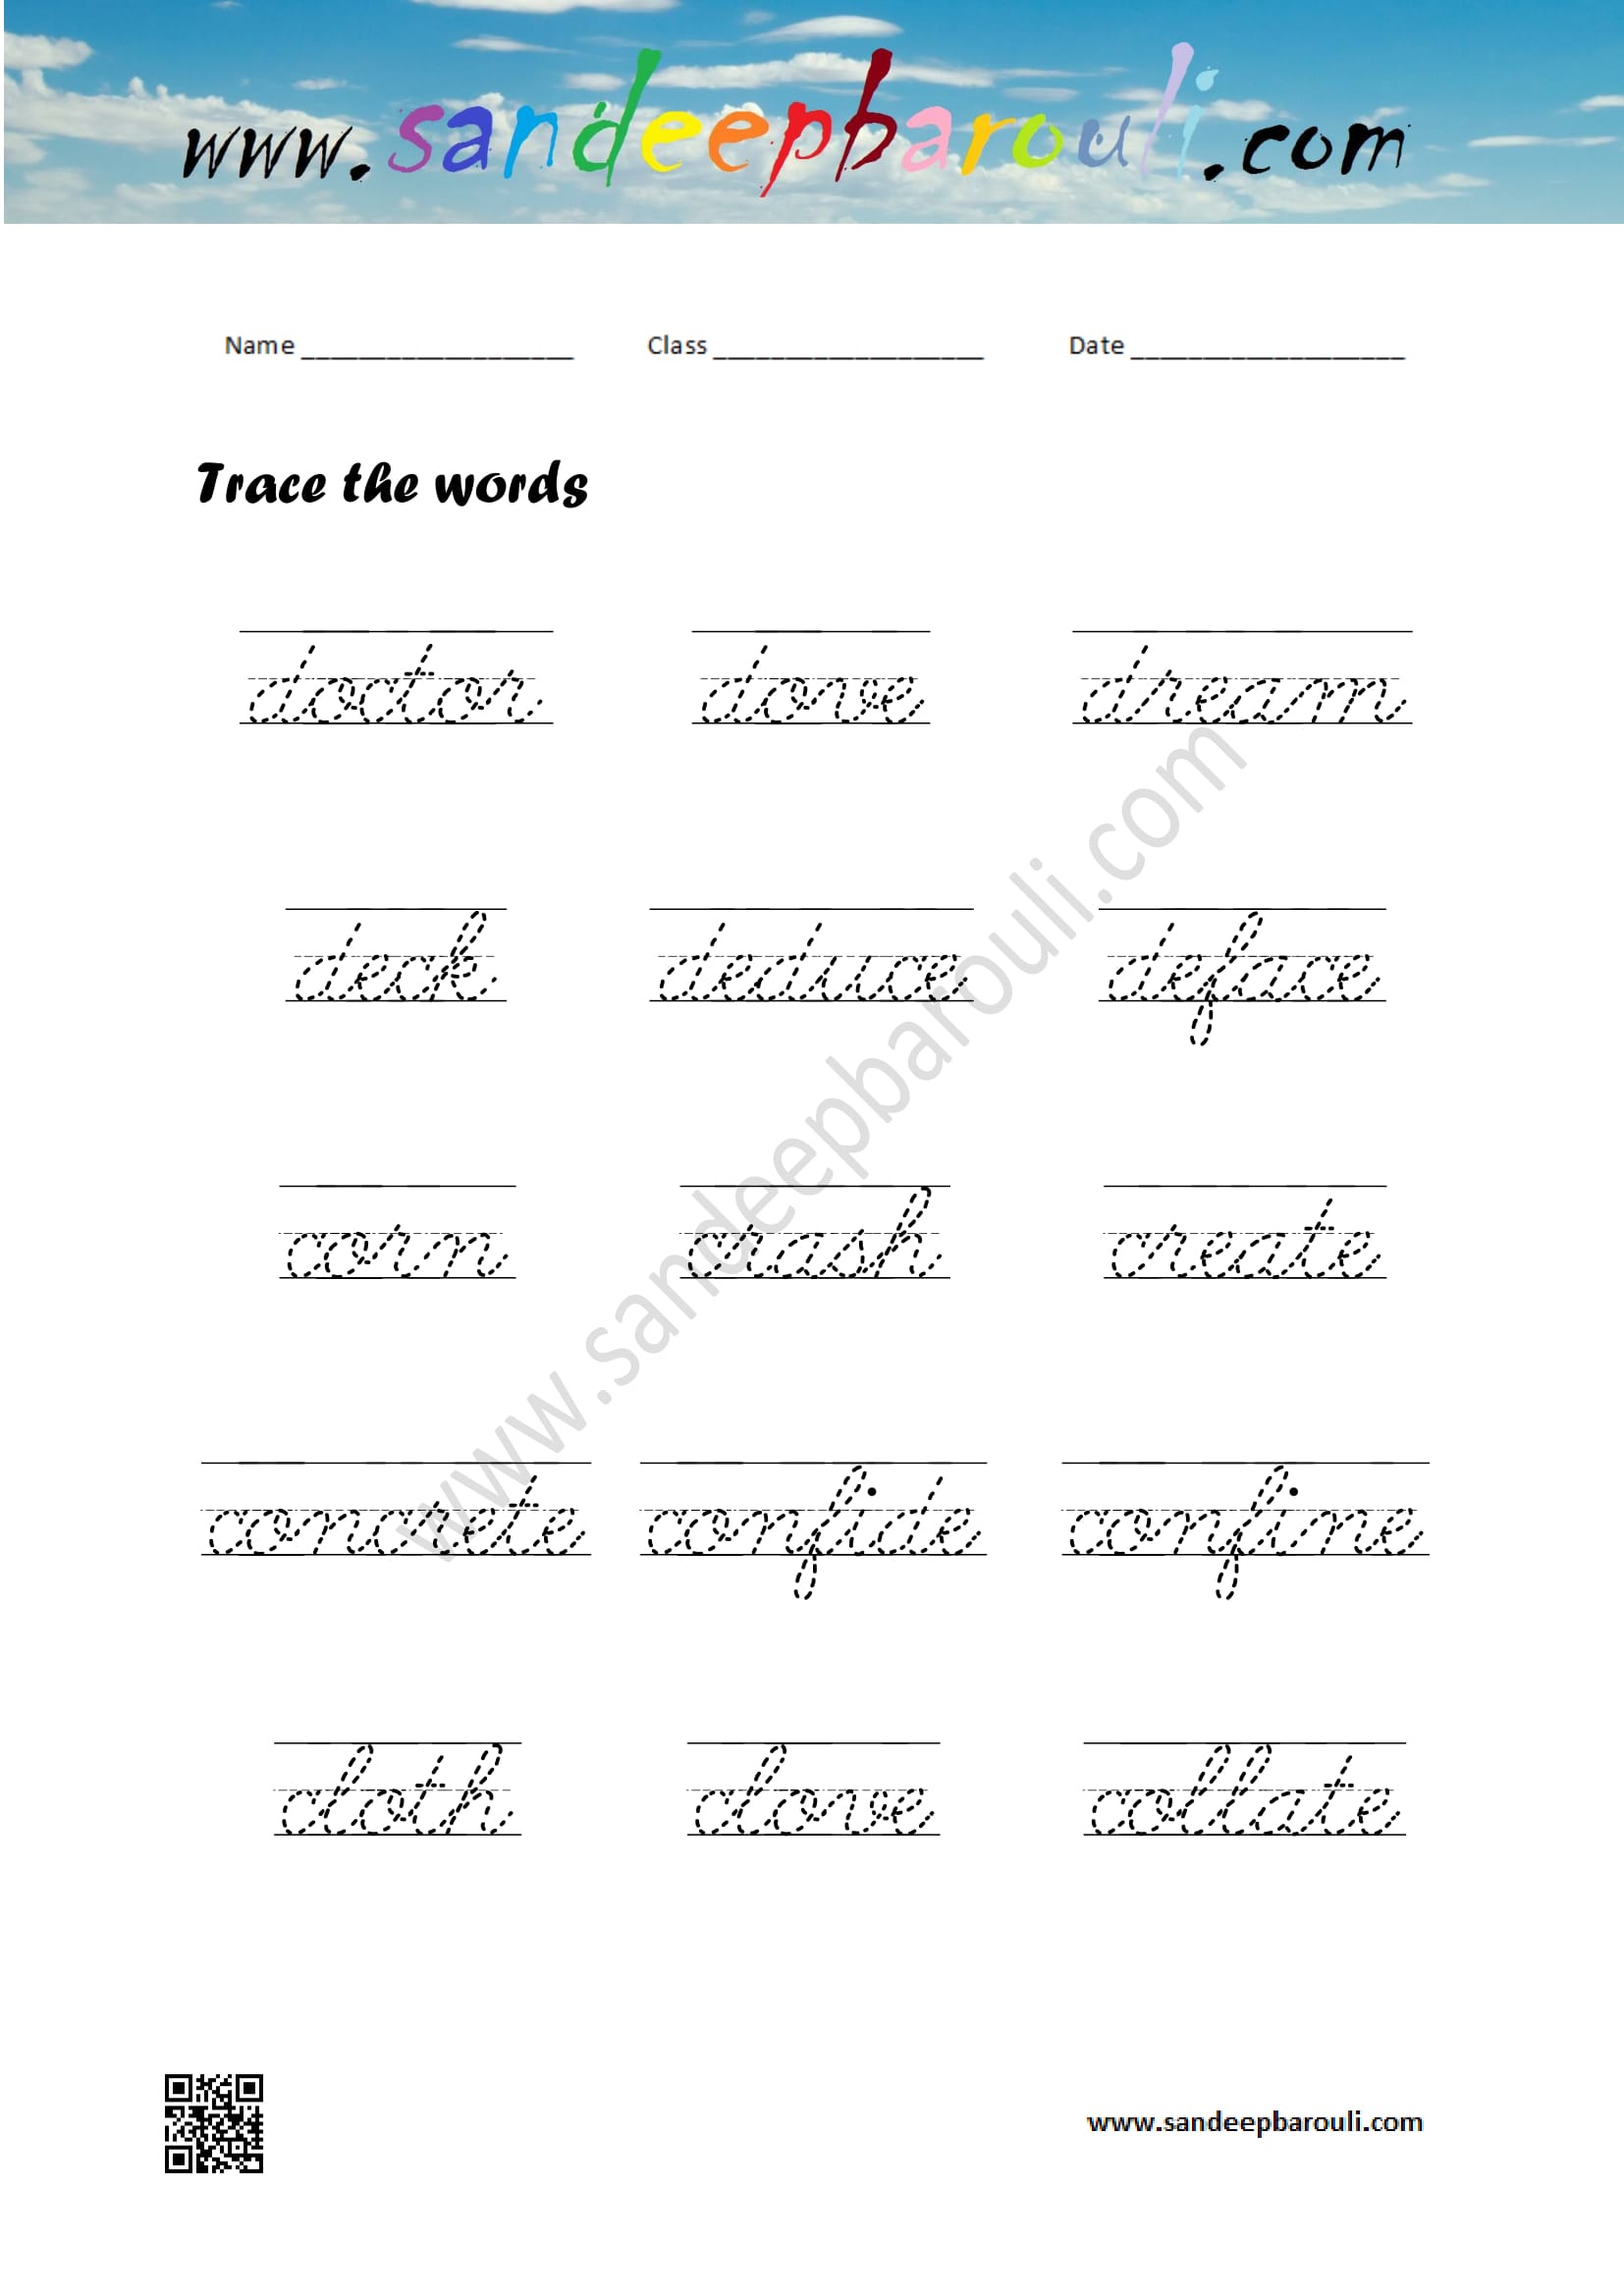 Cursive Writing Worksheet – Trace the words (60)